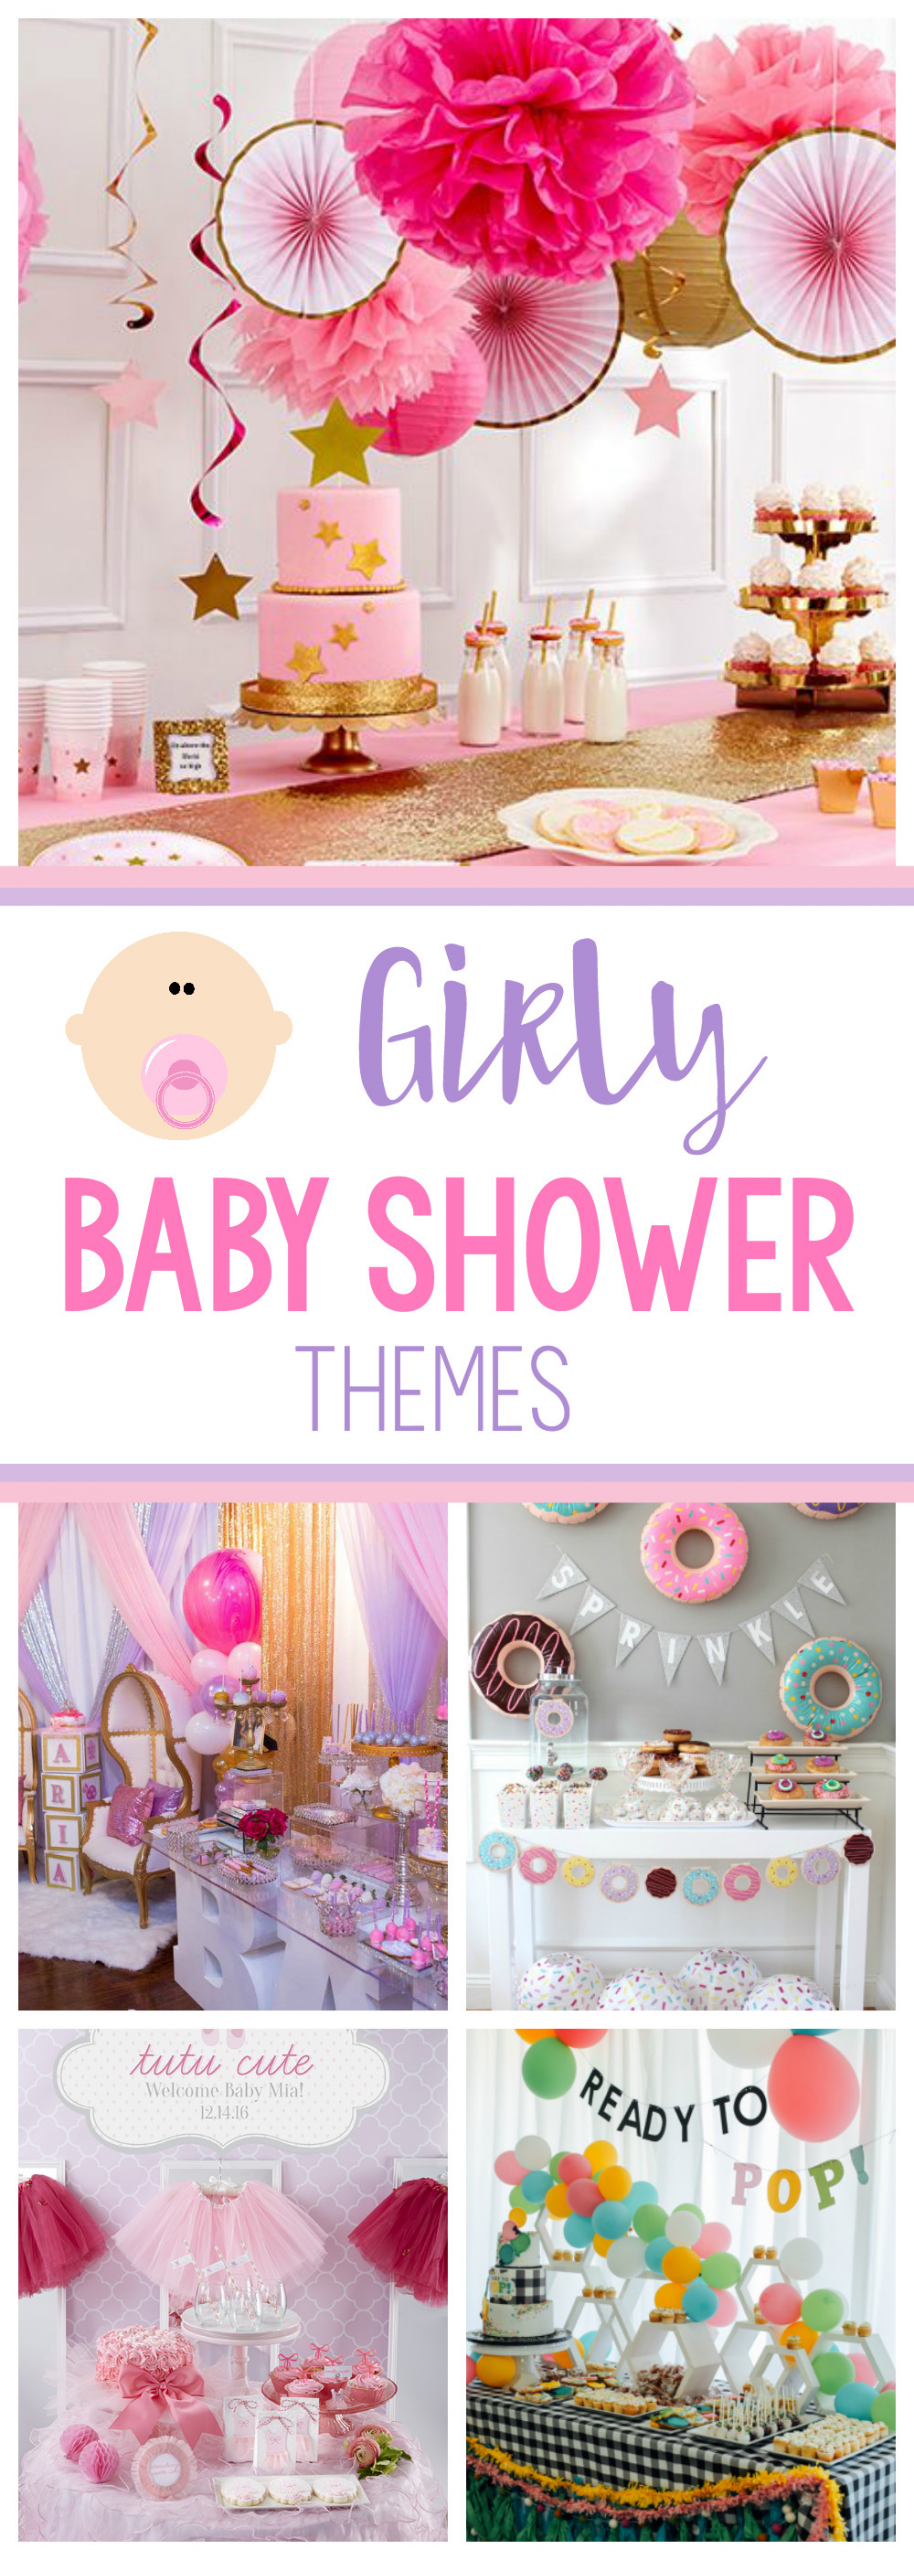 Baby Shower Decorations Girl Ideas
 Cute Girl Baby Shower Themes & Ideas – Fun Squared